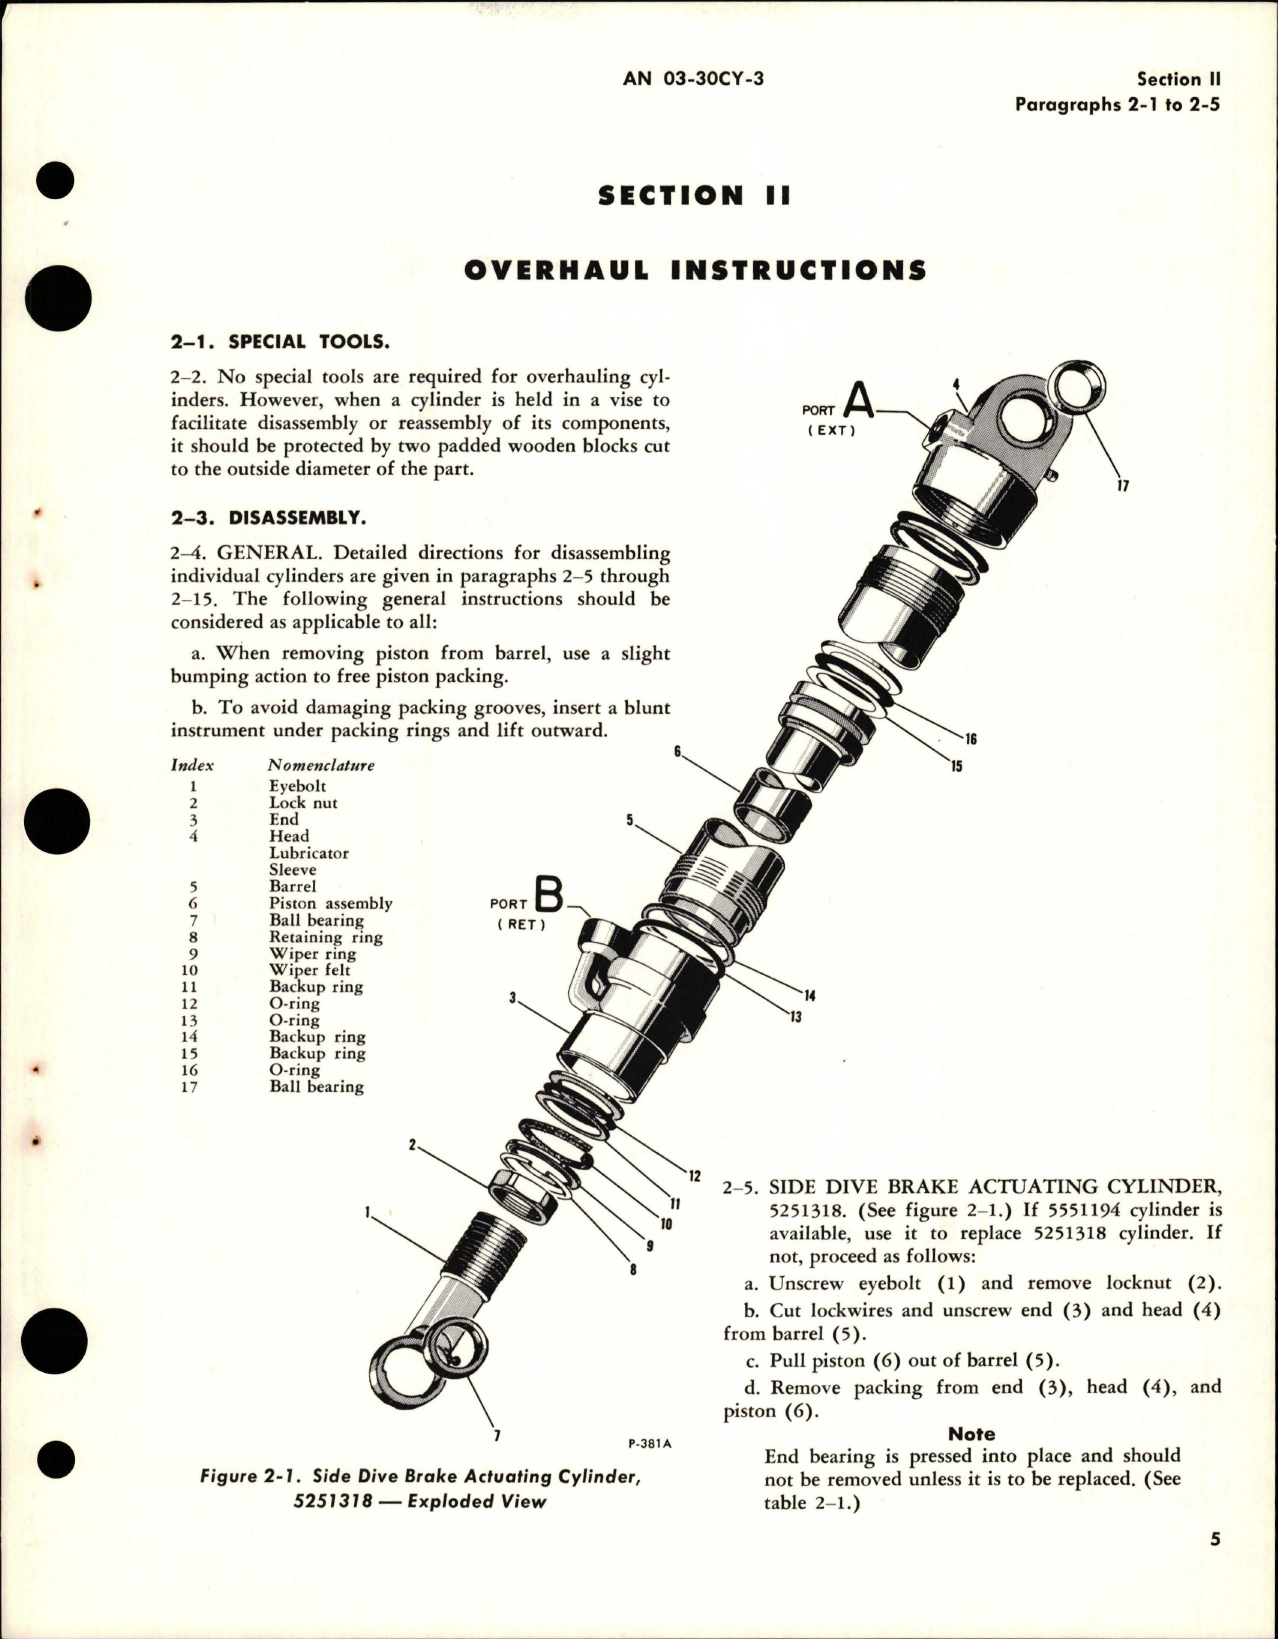 Sample page 9 from AirCorps Library document: Overhaul Instructions for Hydraulic Actuating Cylinders